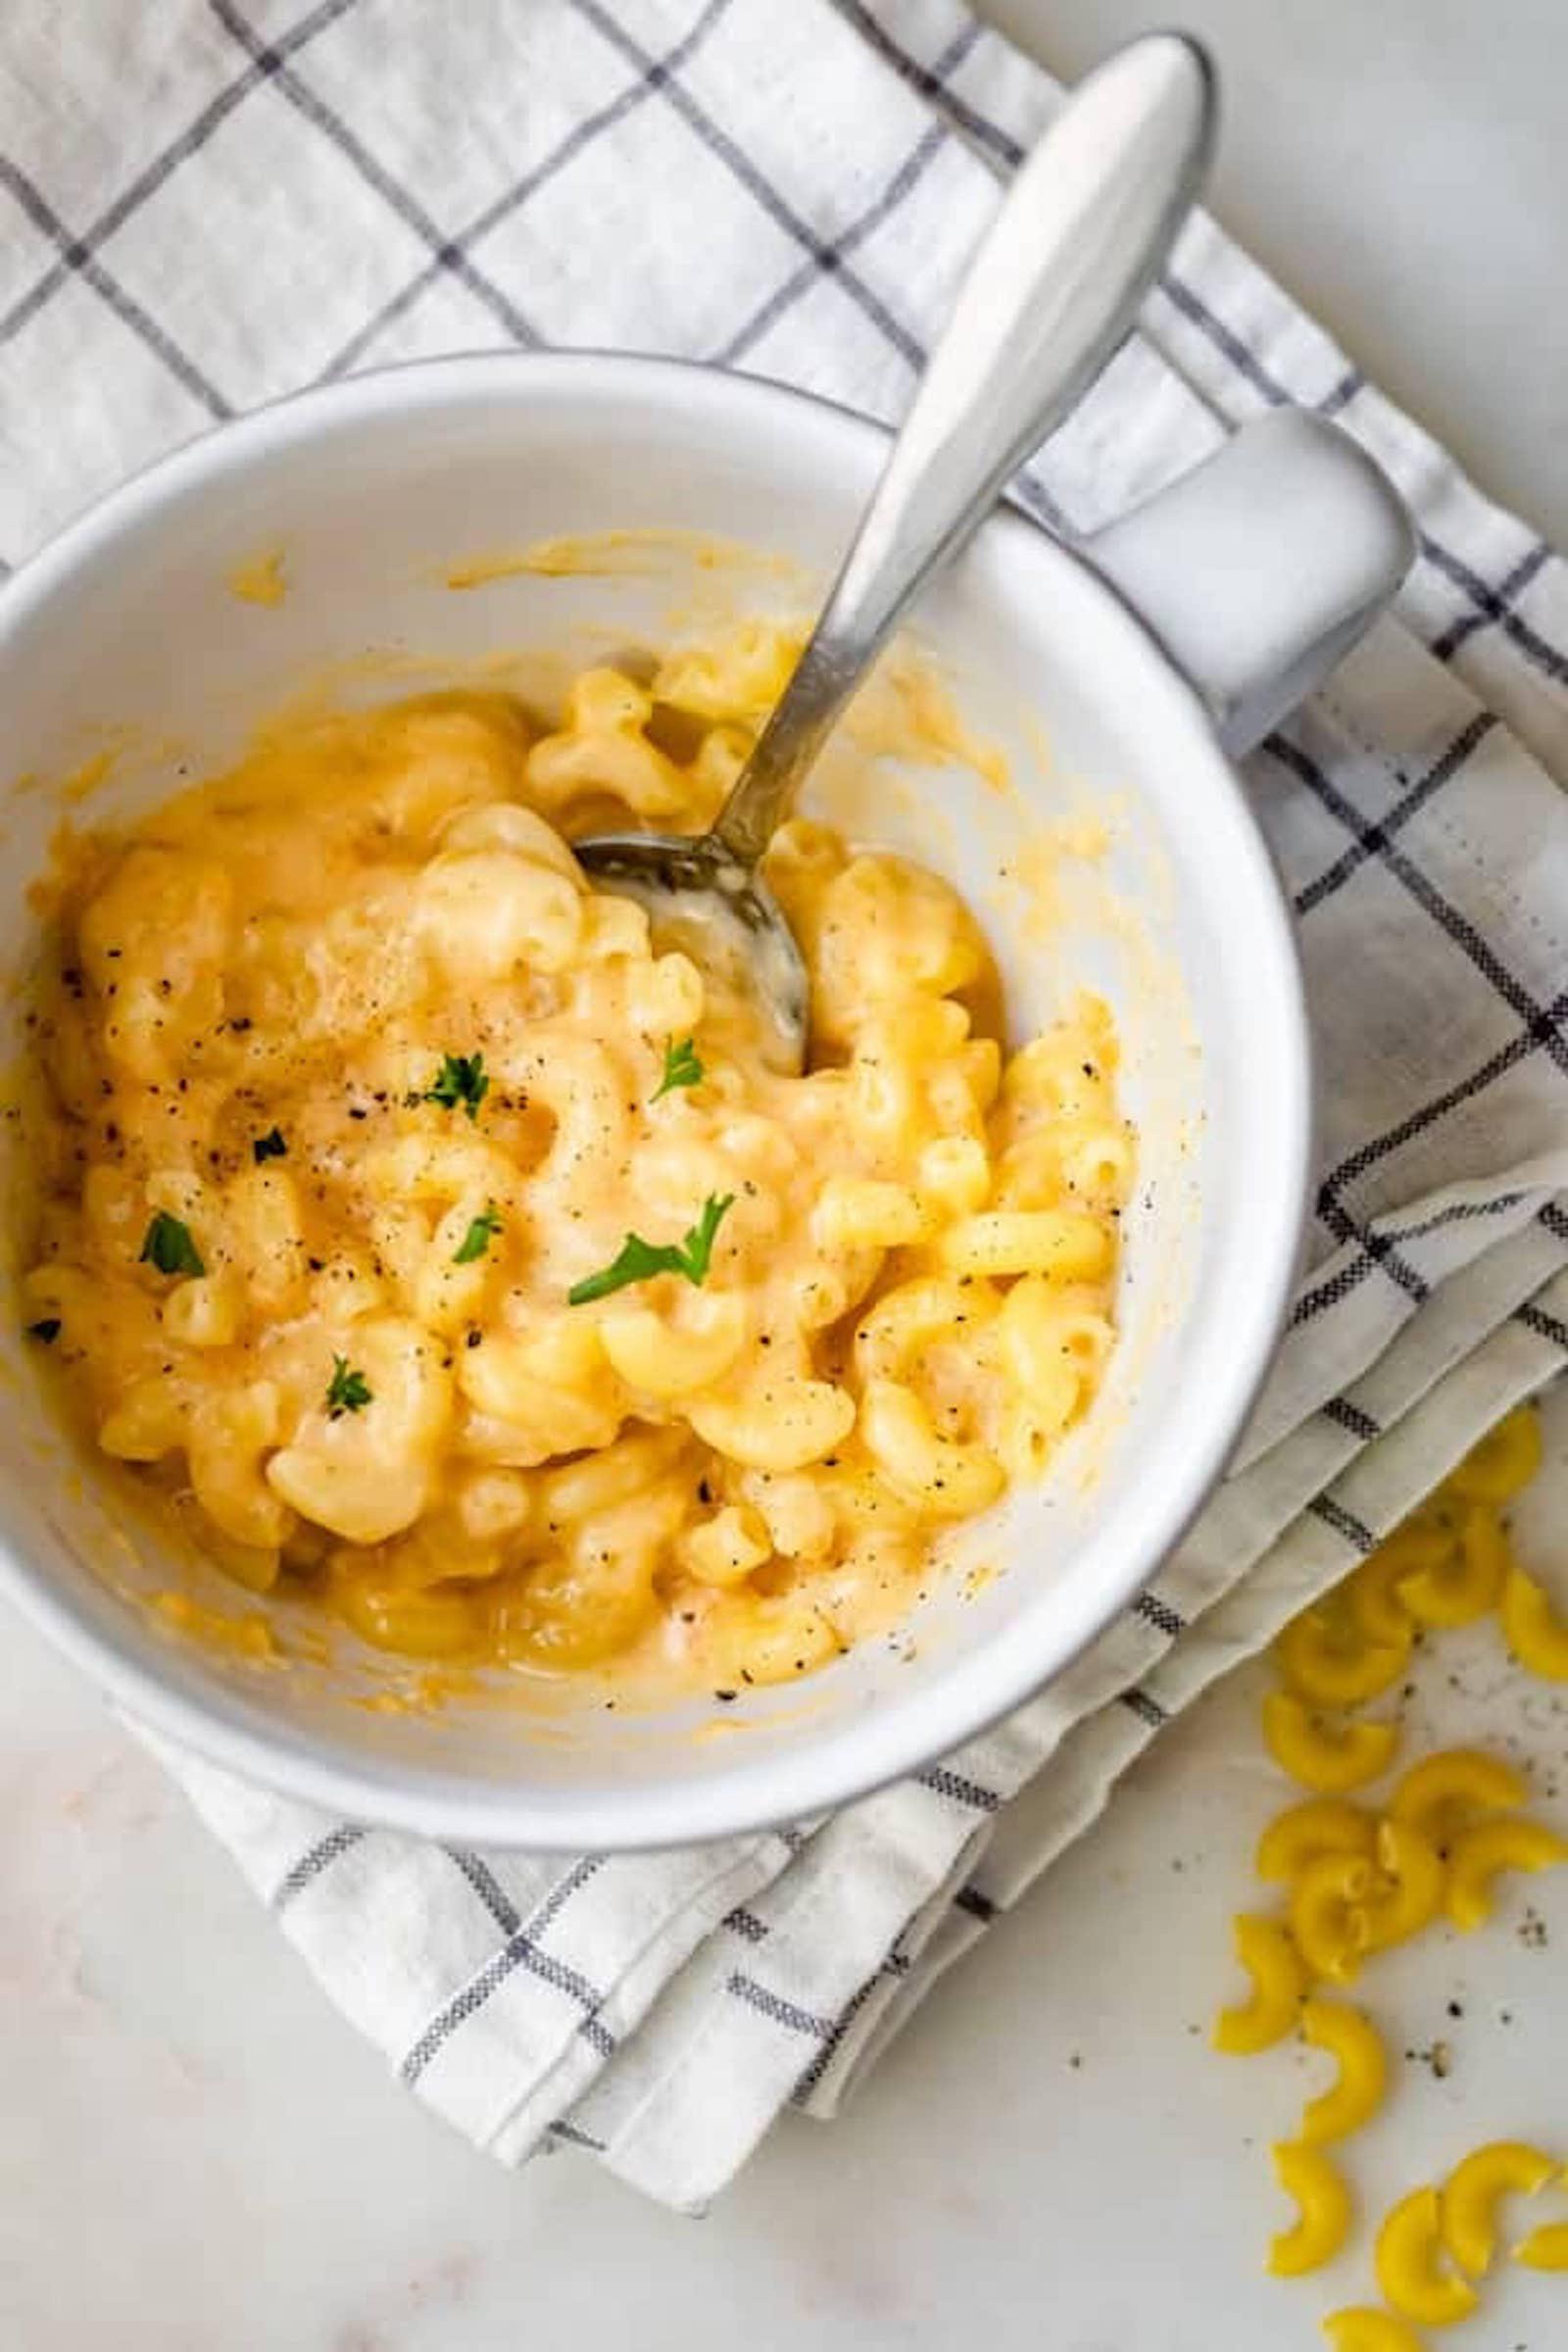 We could <em>never</em> pass up the opportunity to make mug mac and cheese! Since the recipe calls for a bag of shredded cheese, you can just add your fave. (via <strong><a href="https://feelgoodfoodie.net/recipe/instant-pasta-in-a-mug/">Feel Good Foodie</a></strong>)